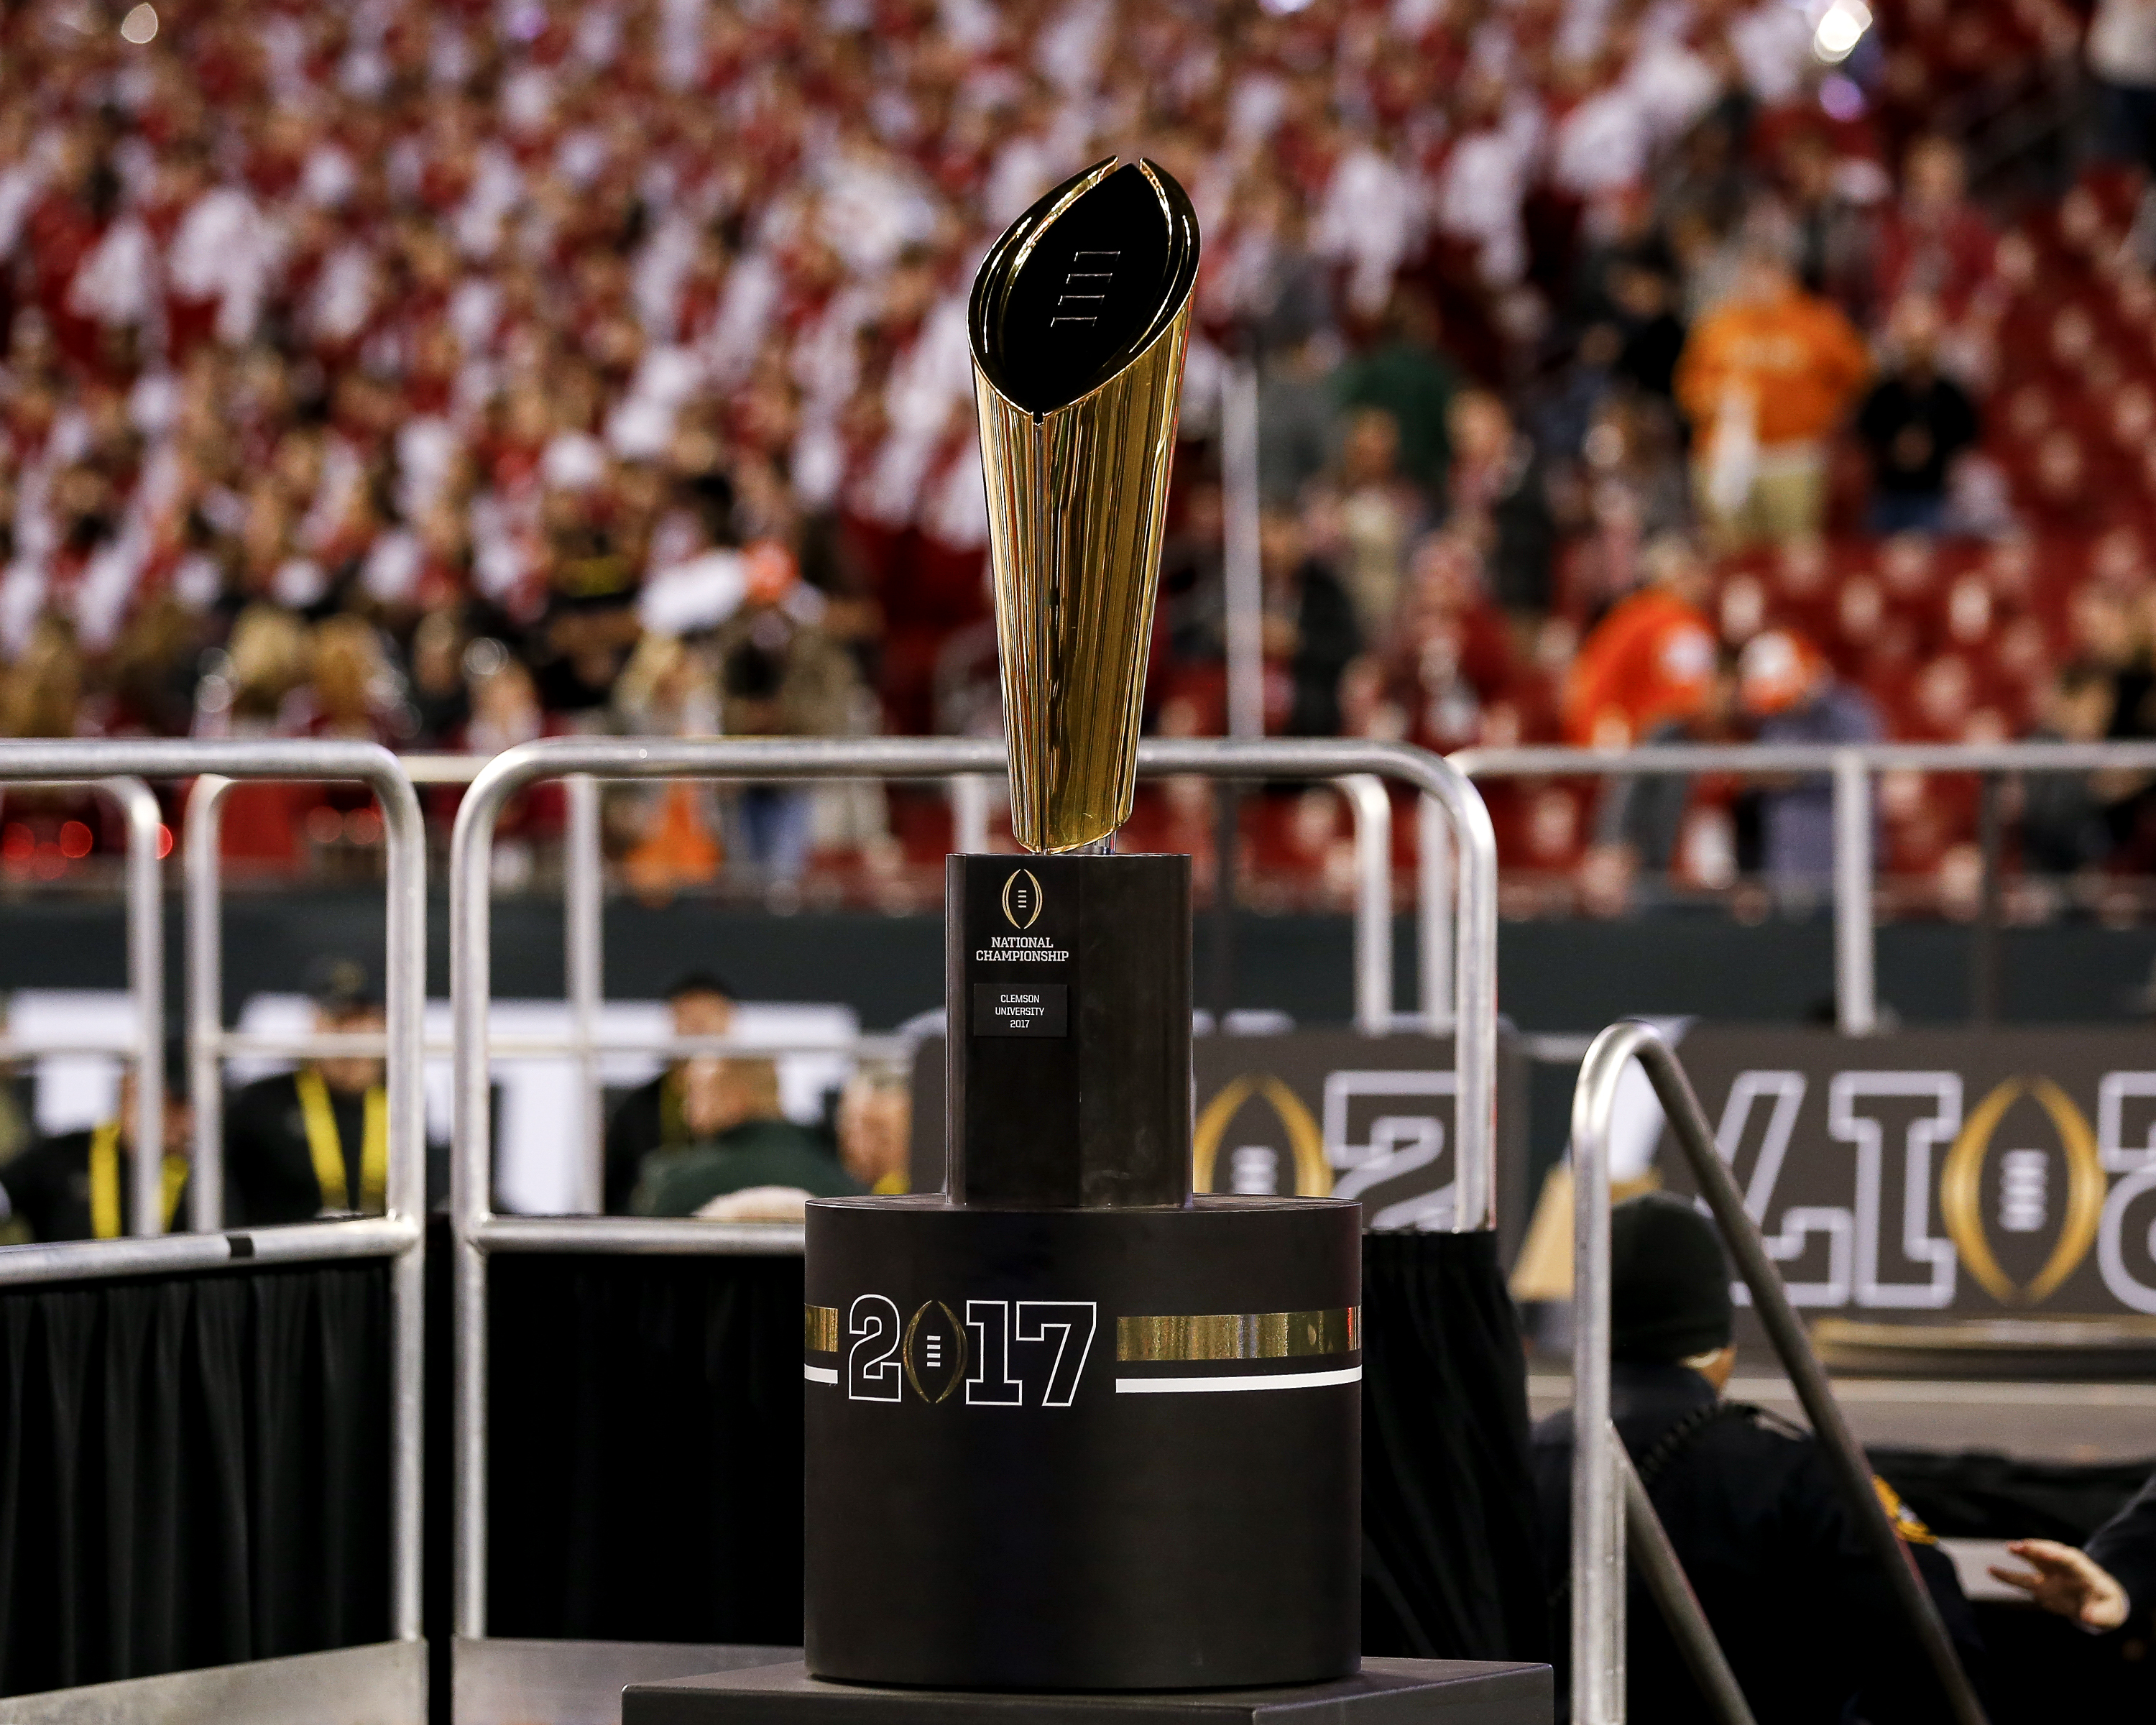 A general view of The College Football Playoff National Championship Trophy presented by Dr Pepper after the 2017 College Football Playoff National Championship Game between the Alabama Crimson Tide against the Clemson Tigers at Raymond James Stadium on January 9, 2017 in Tampa, Florida.